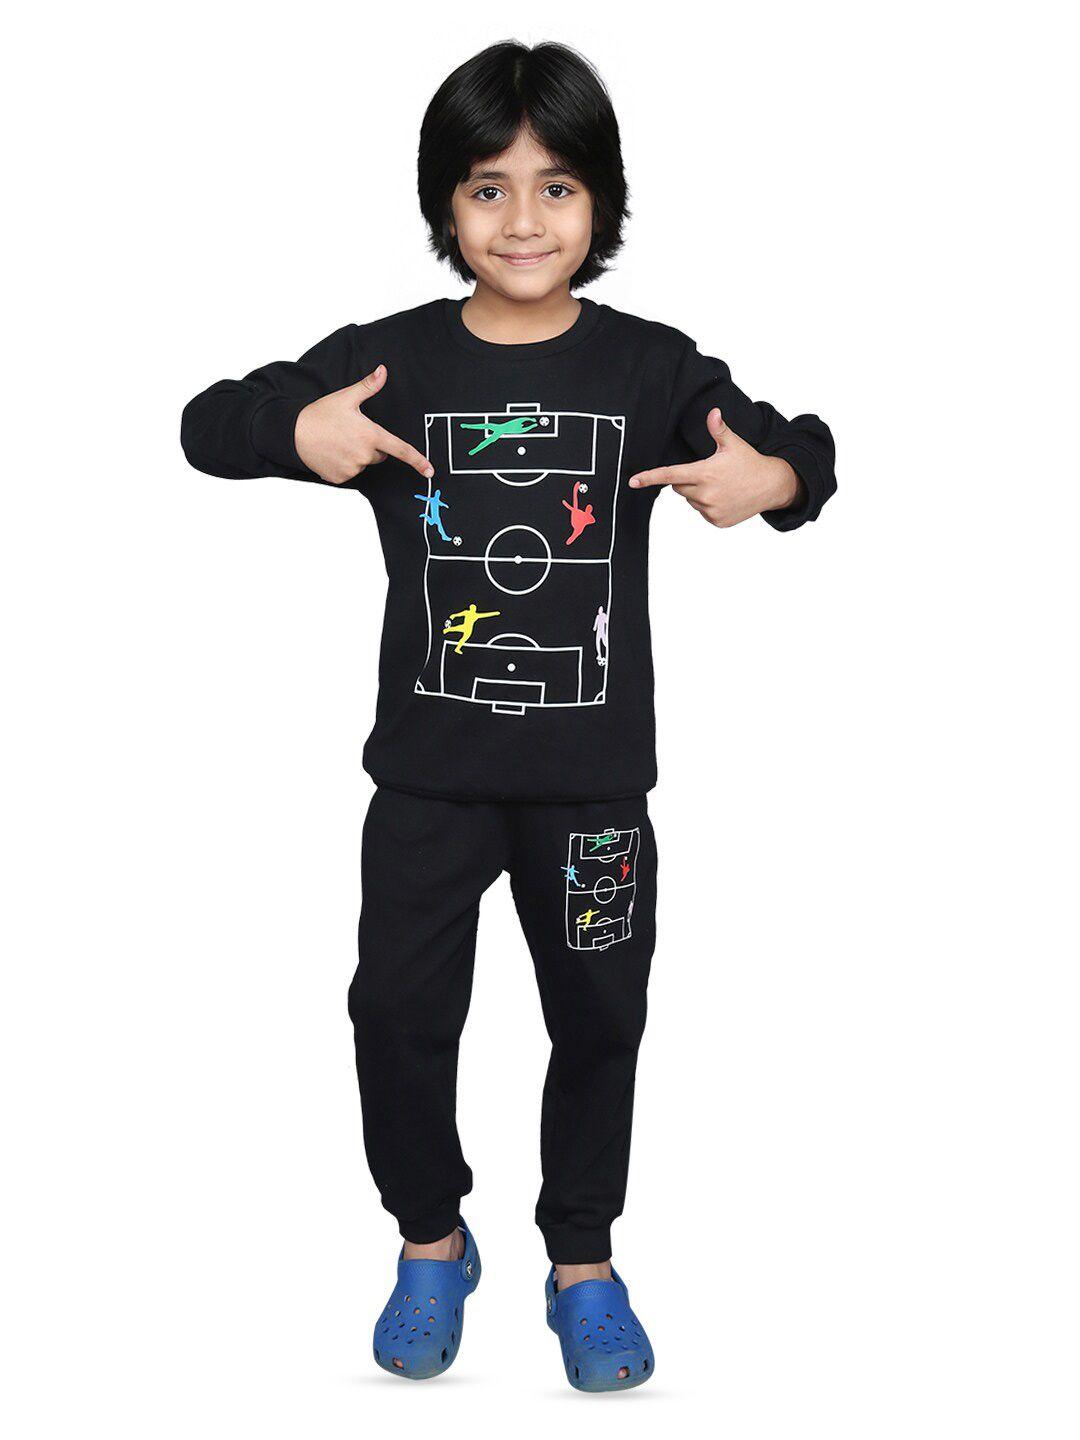 zip zap zoop boys graphic printed pure cotton t-shirt with trousers